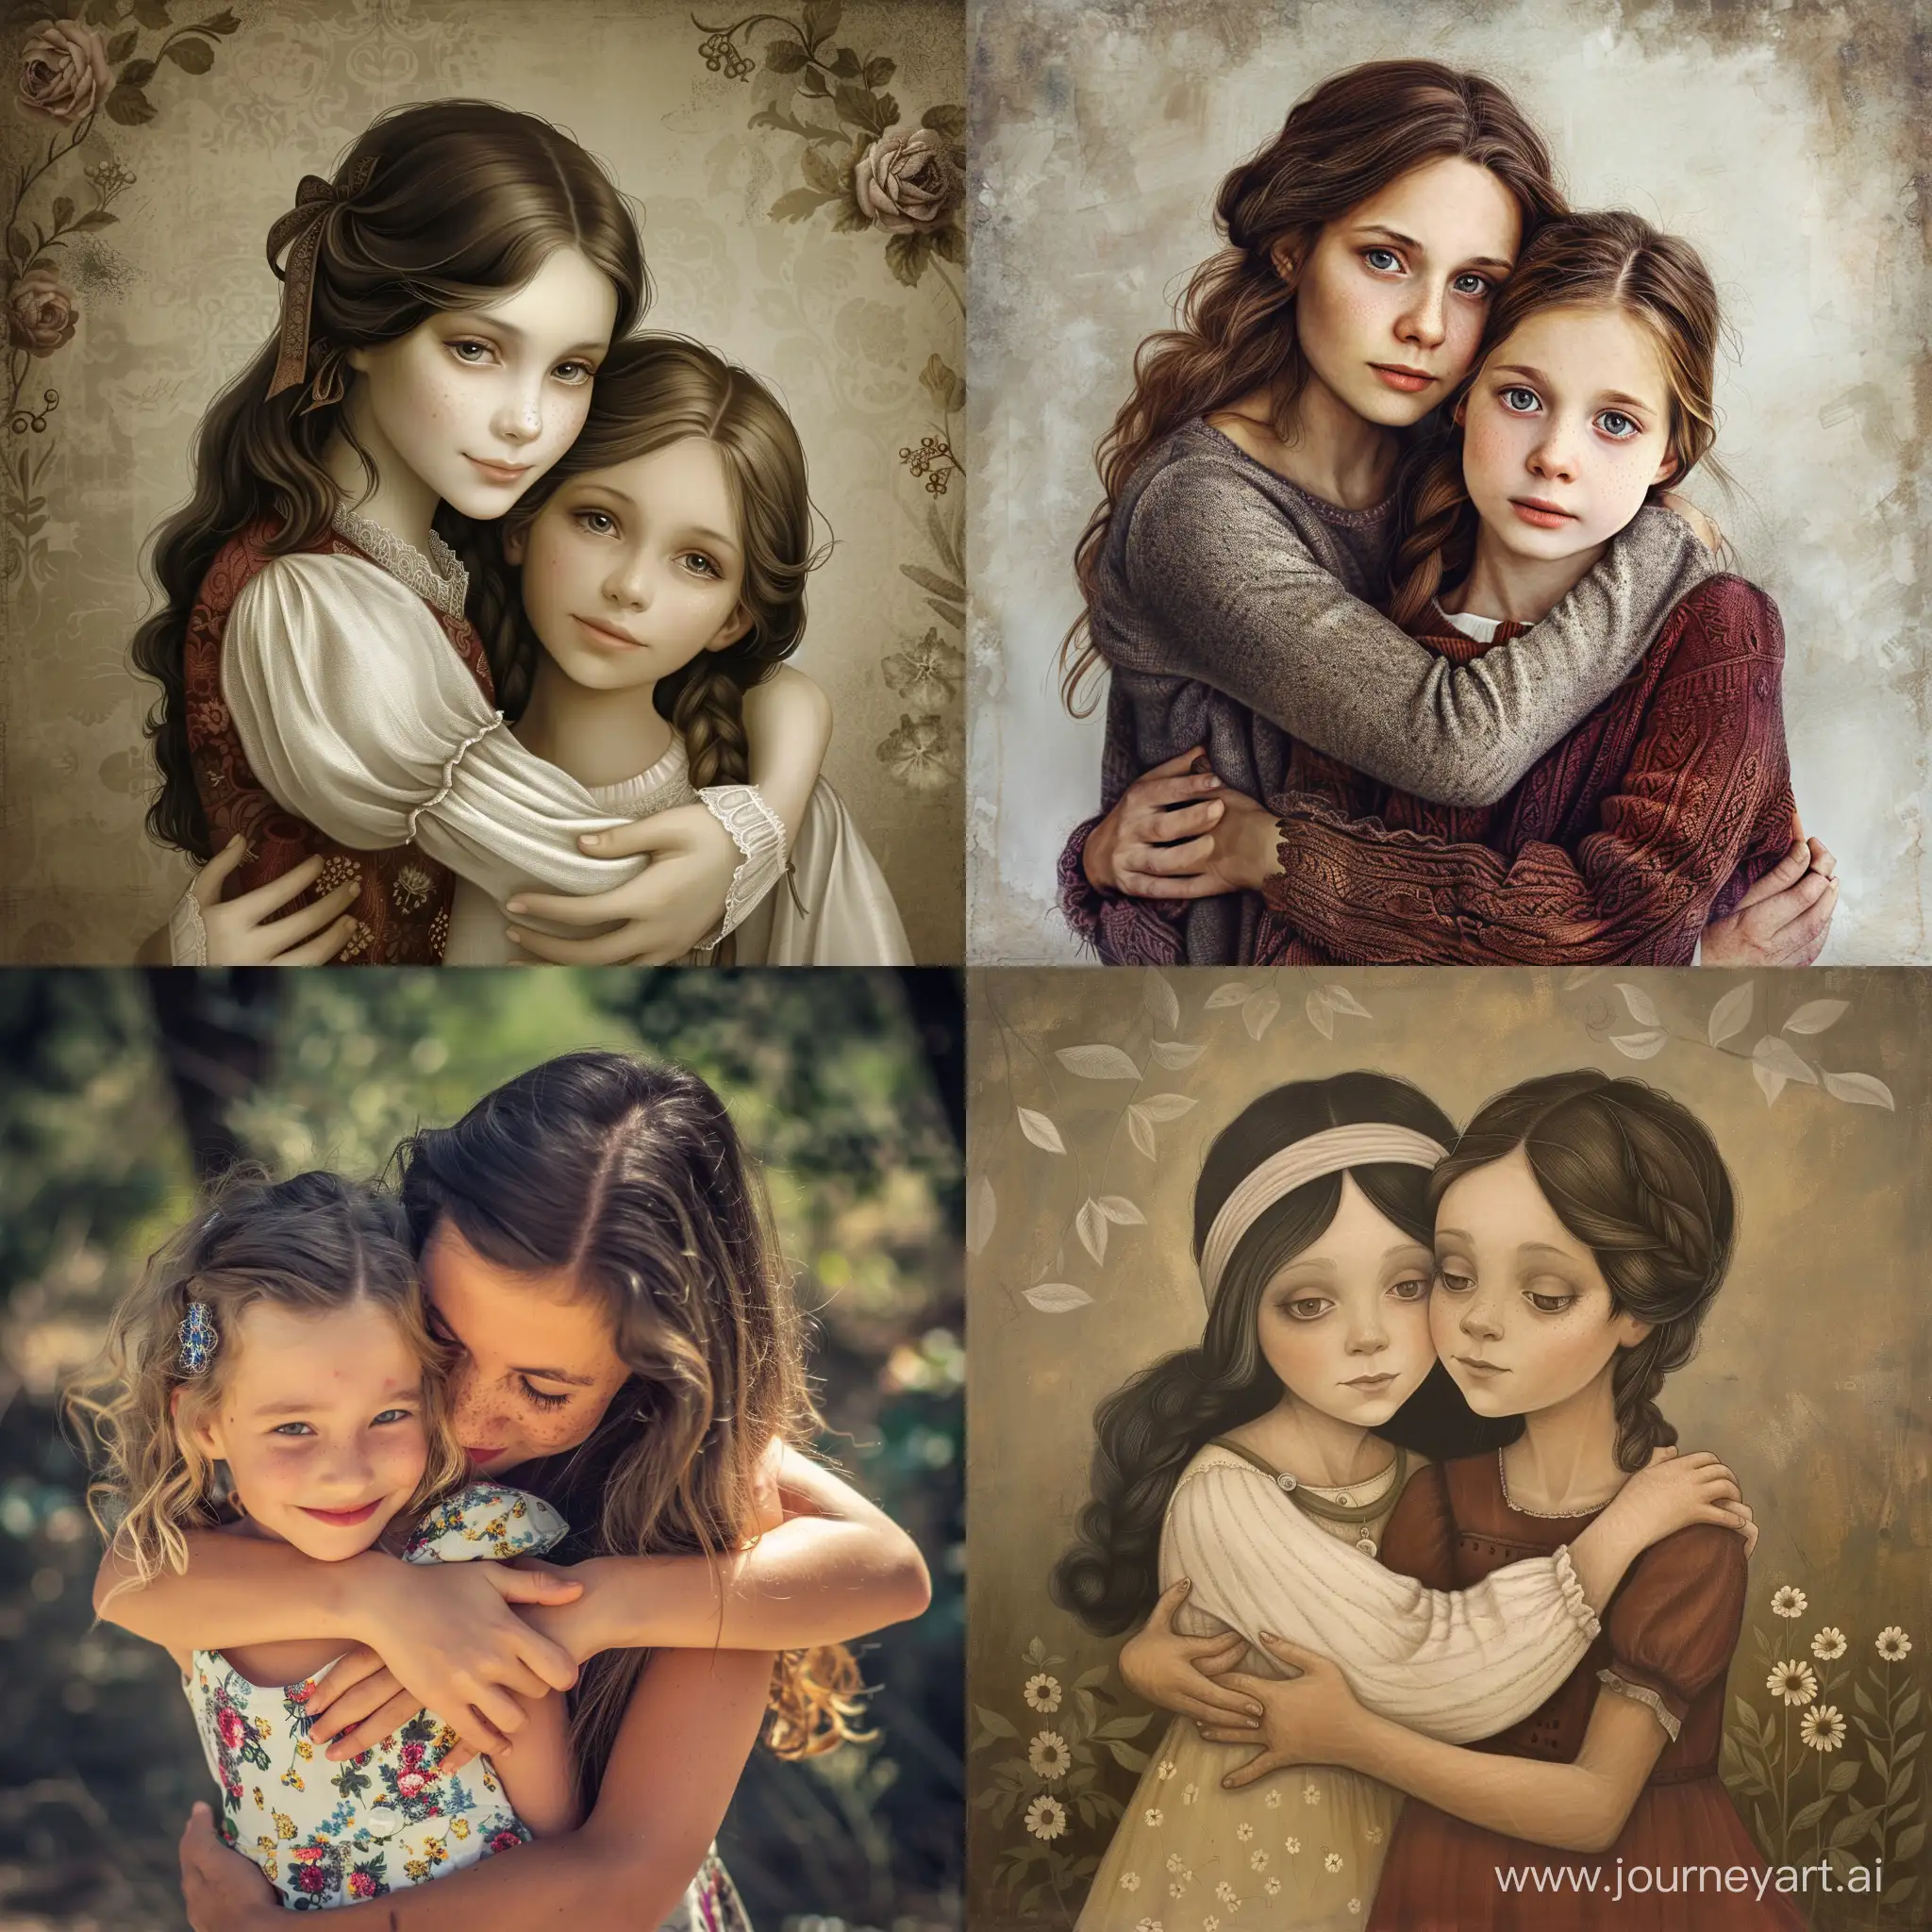 Mother-Embracing-Daughters-A-Tale-of-Beauty-and-Acceptance